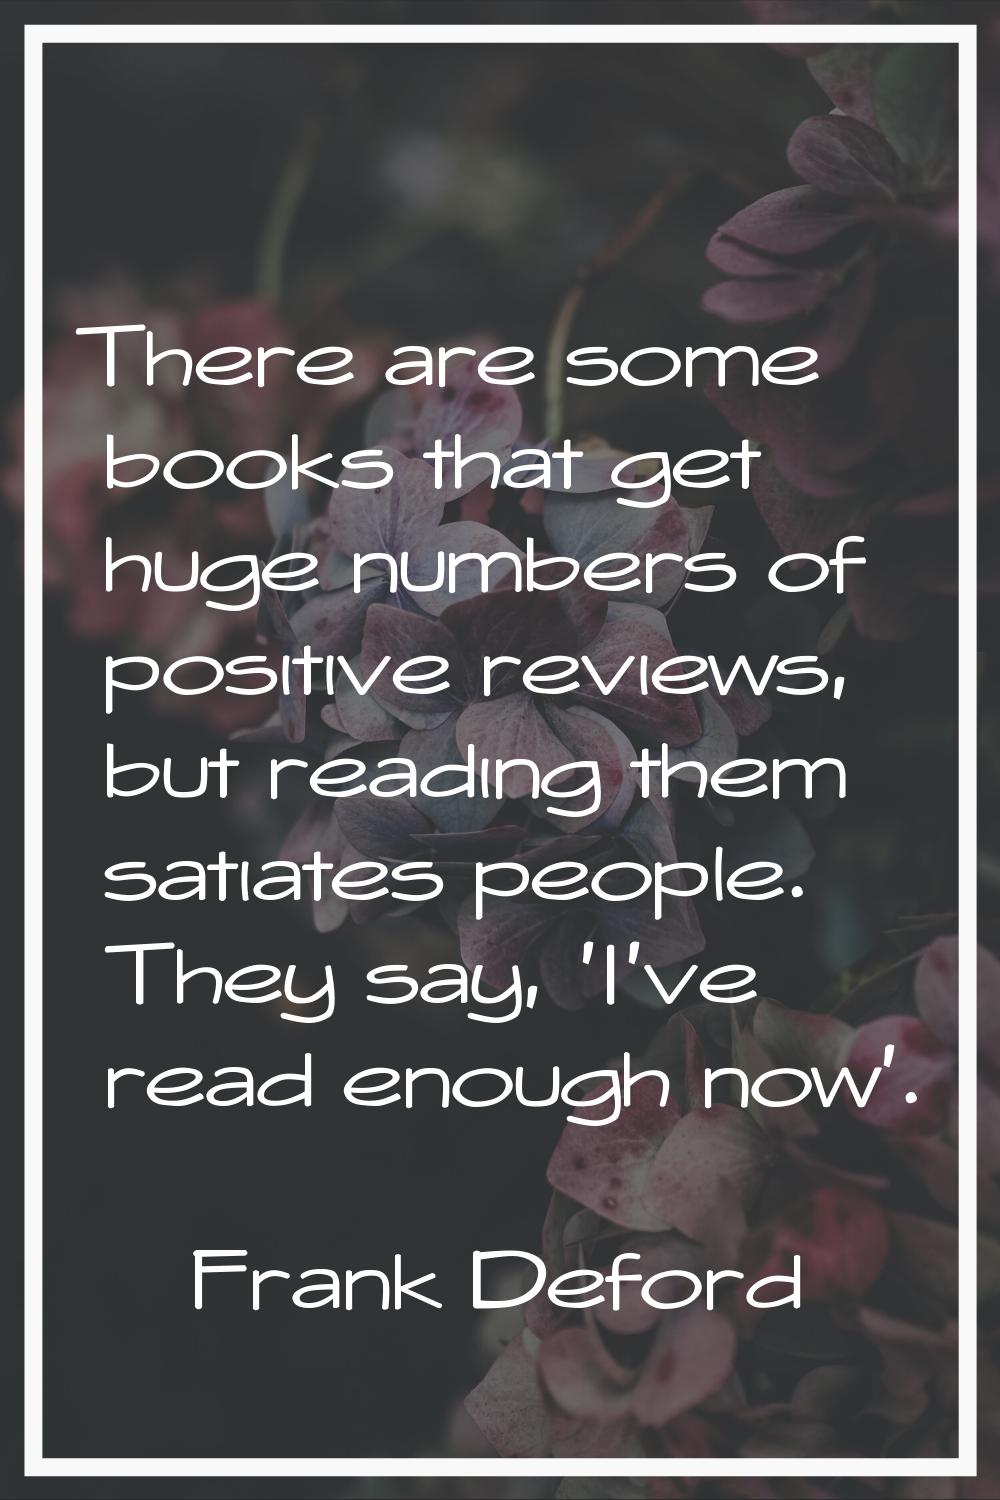 There are some books that get huge numbers of positive reviews, but reading them satiates people. T